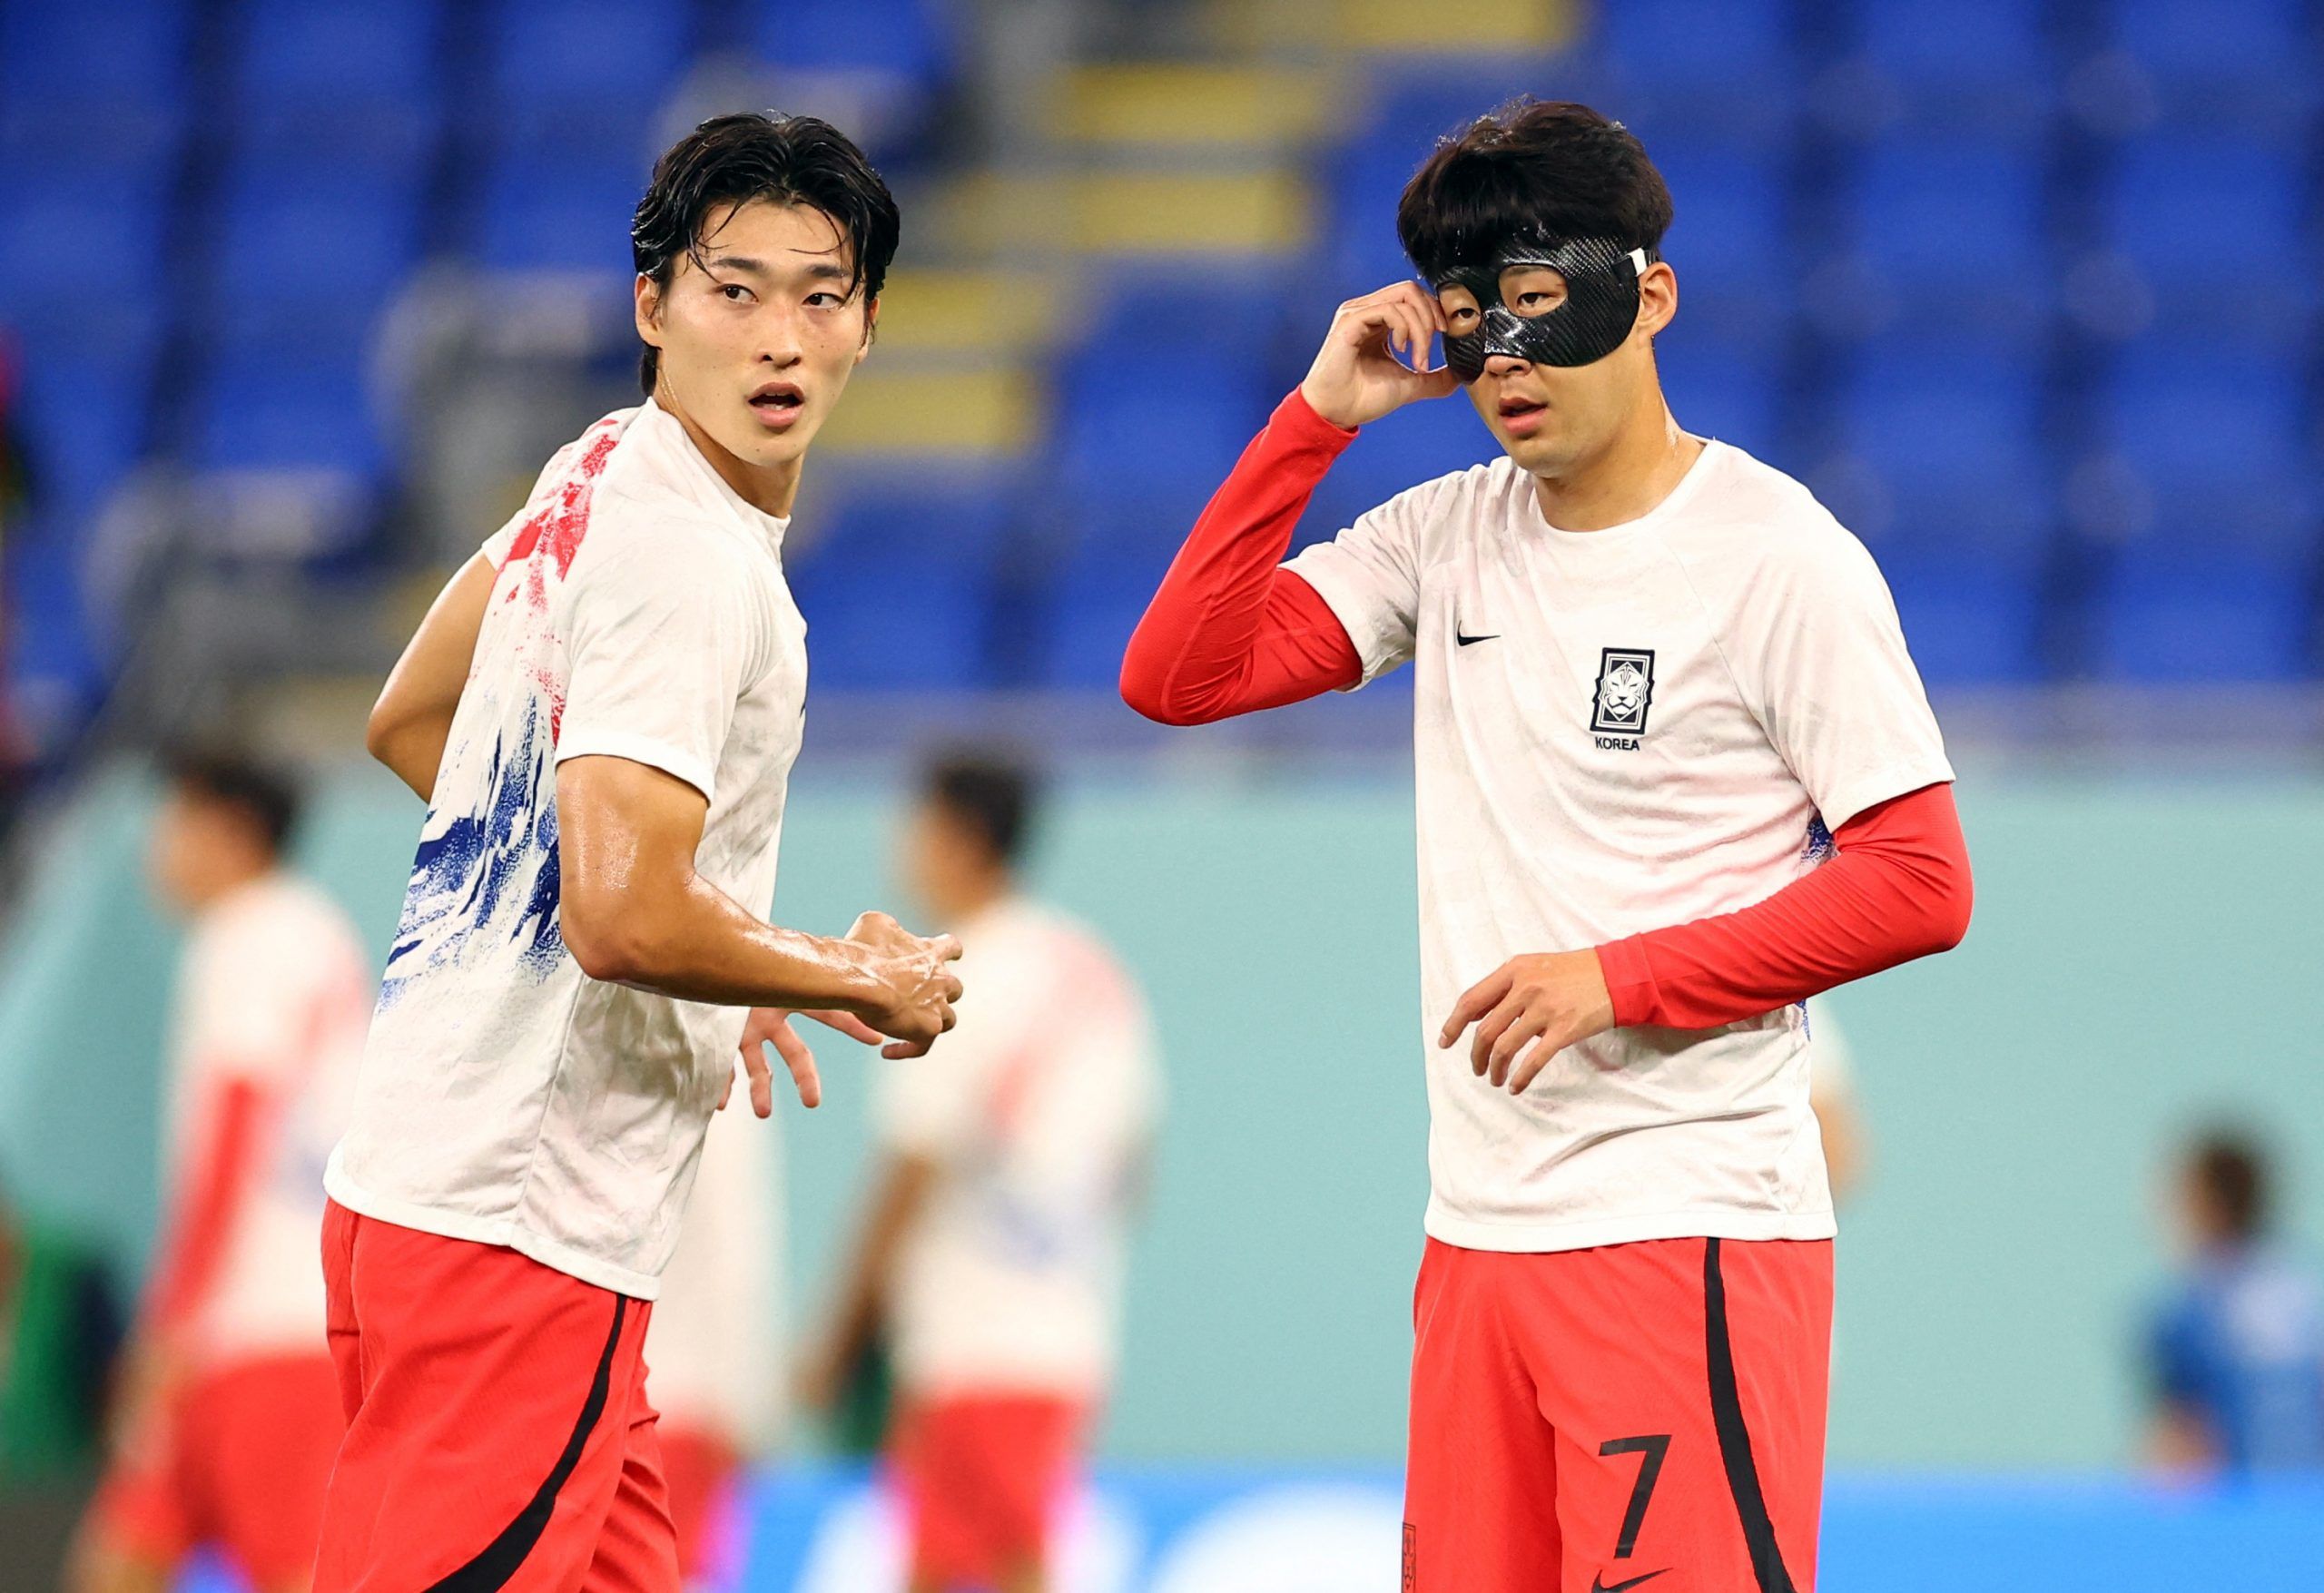 Soccer Football - FIFA World Cup Qatar 2022 - Round of 16 - Brazil v South Korea - Stadium 974, Doha, Qatar - December 5, 2022 South Korea's Cho Gue-sung and Son Heung-min during the warm up before the match REUTERS/Carl Recine